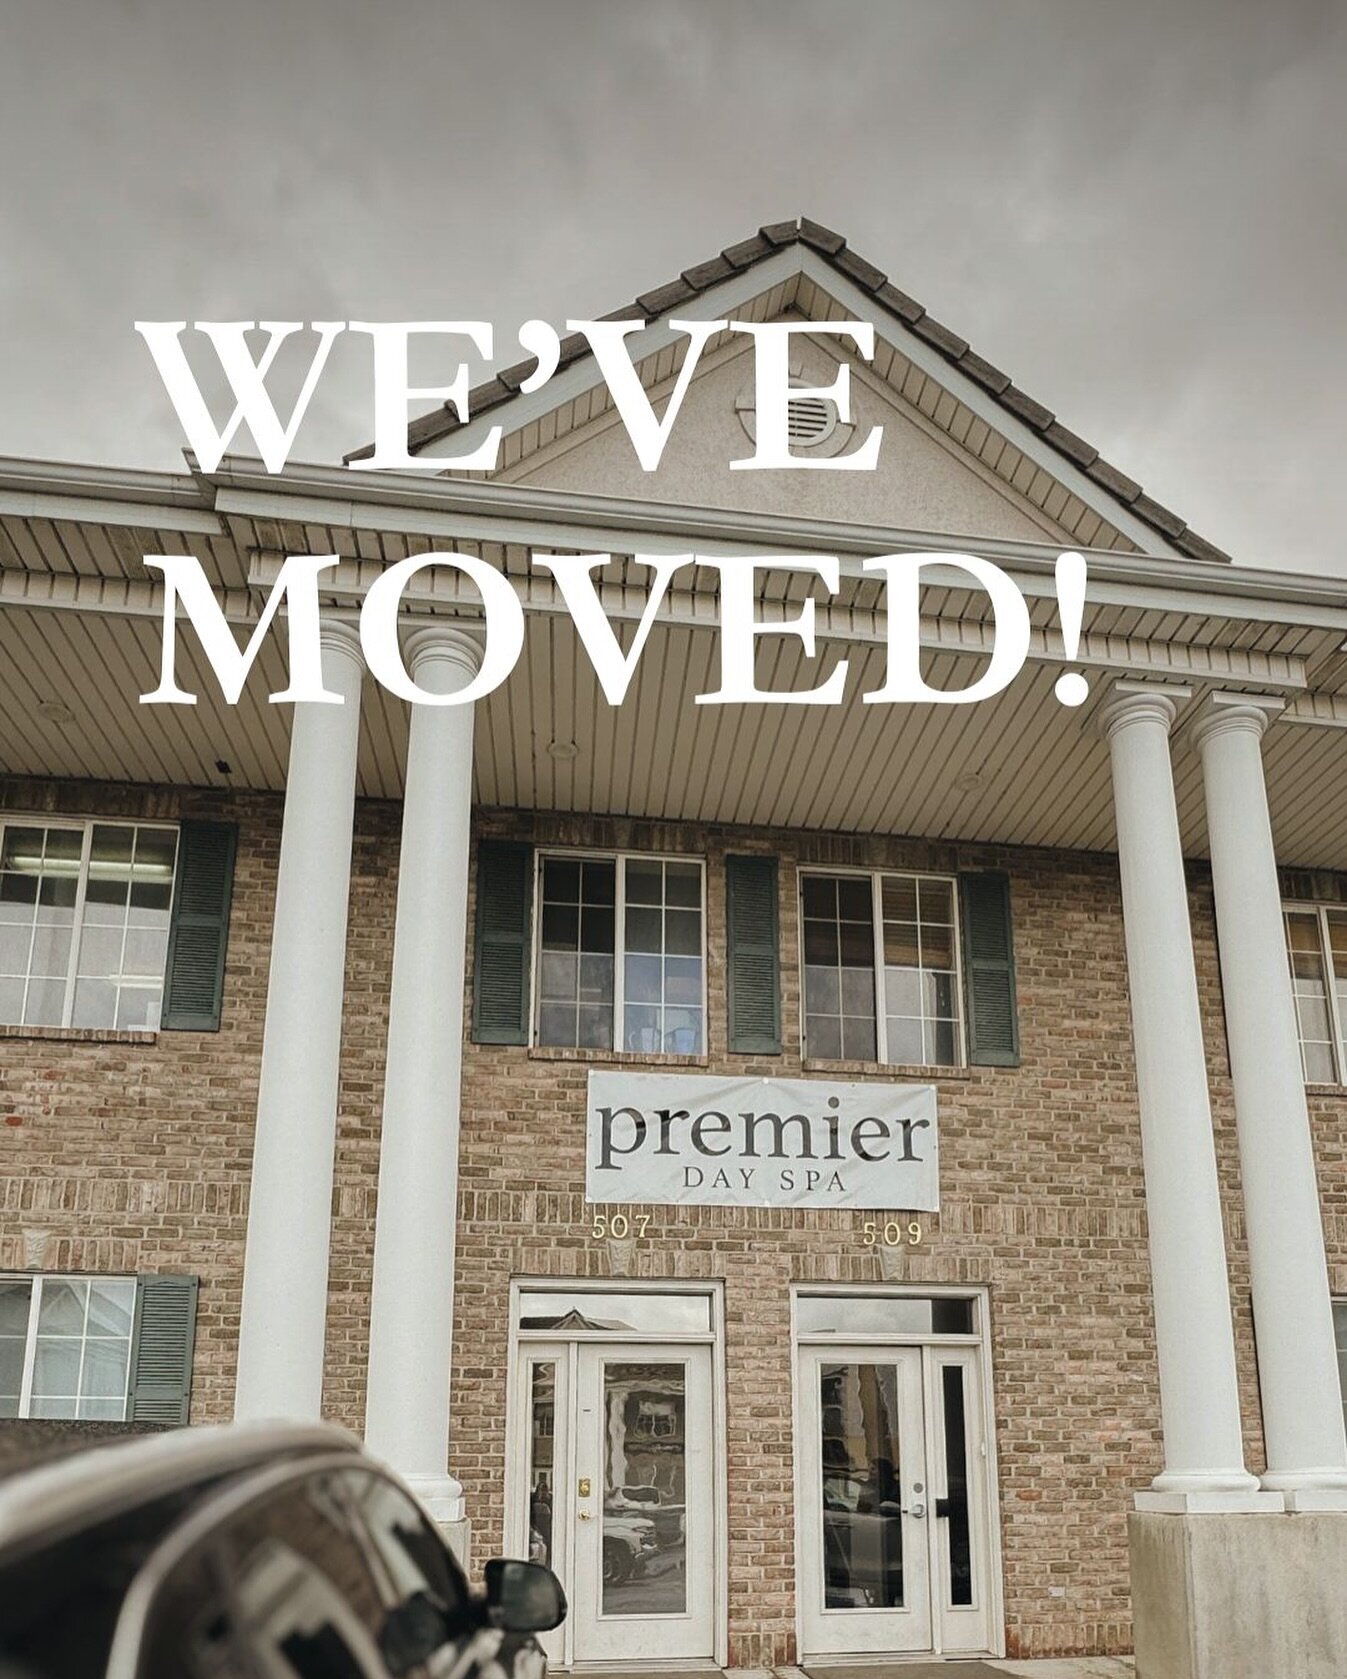 We moved! (Only 10 seconds away from our previous location). 

From the bottom of our hearts, thank you so much for supporting us in this new chapter. We hope you come visit us soon.